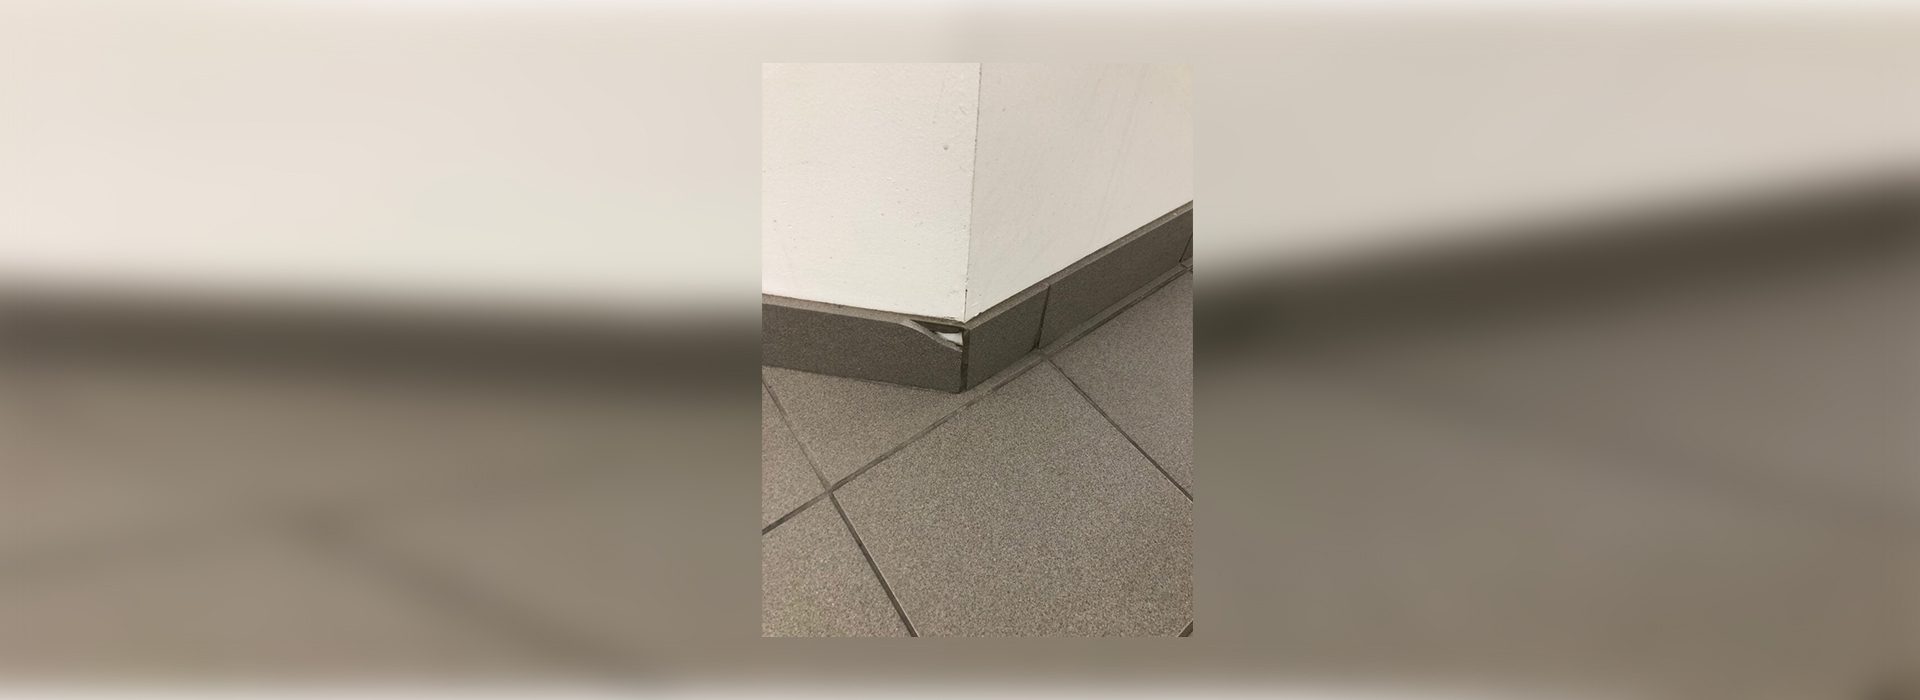 A corner of the floor with a metal edge.